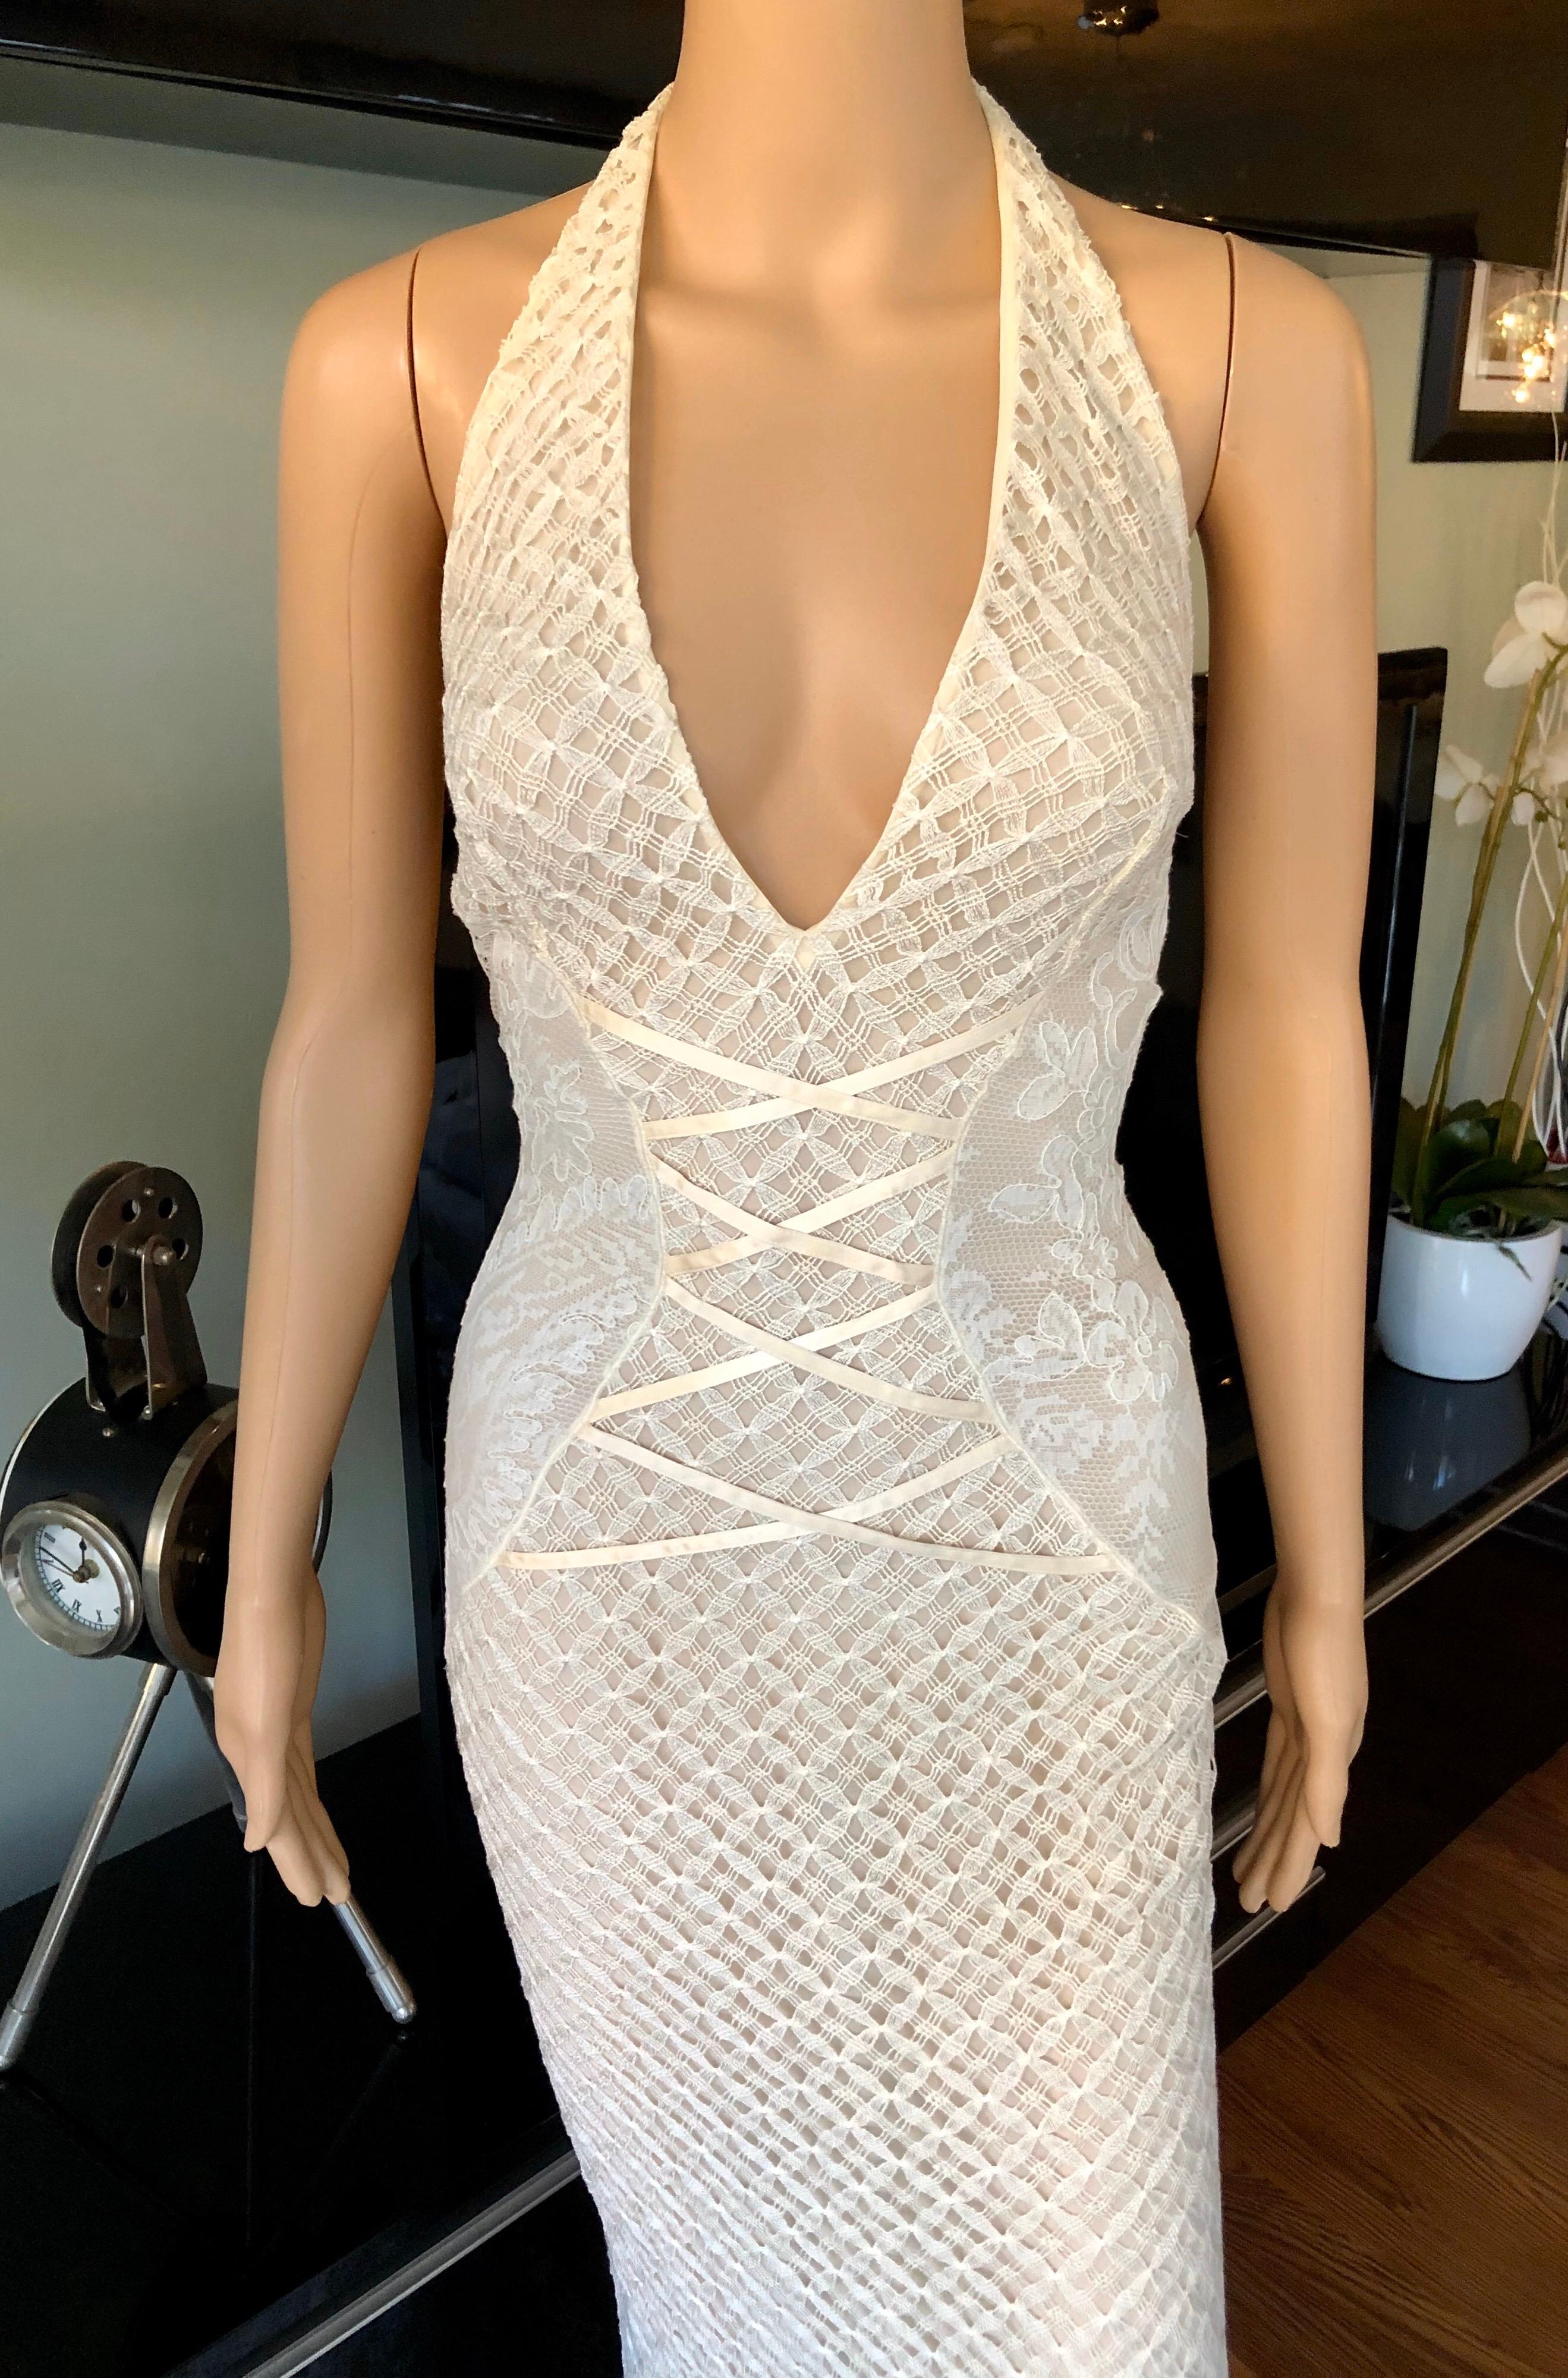 NWT Gianni Versace S/S 2002 Plunging Backless Semi Sheer Lace Ivory Dress Gown In New Condition For Sale In Naples, FL